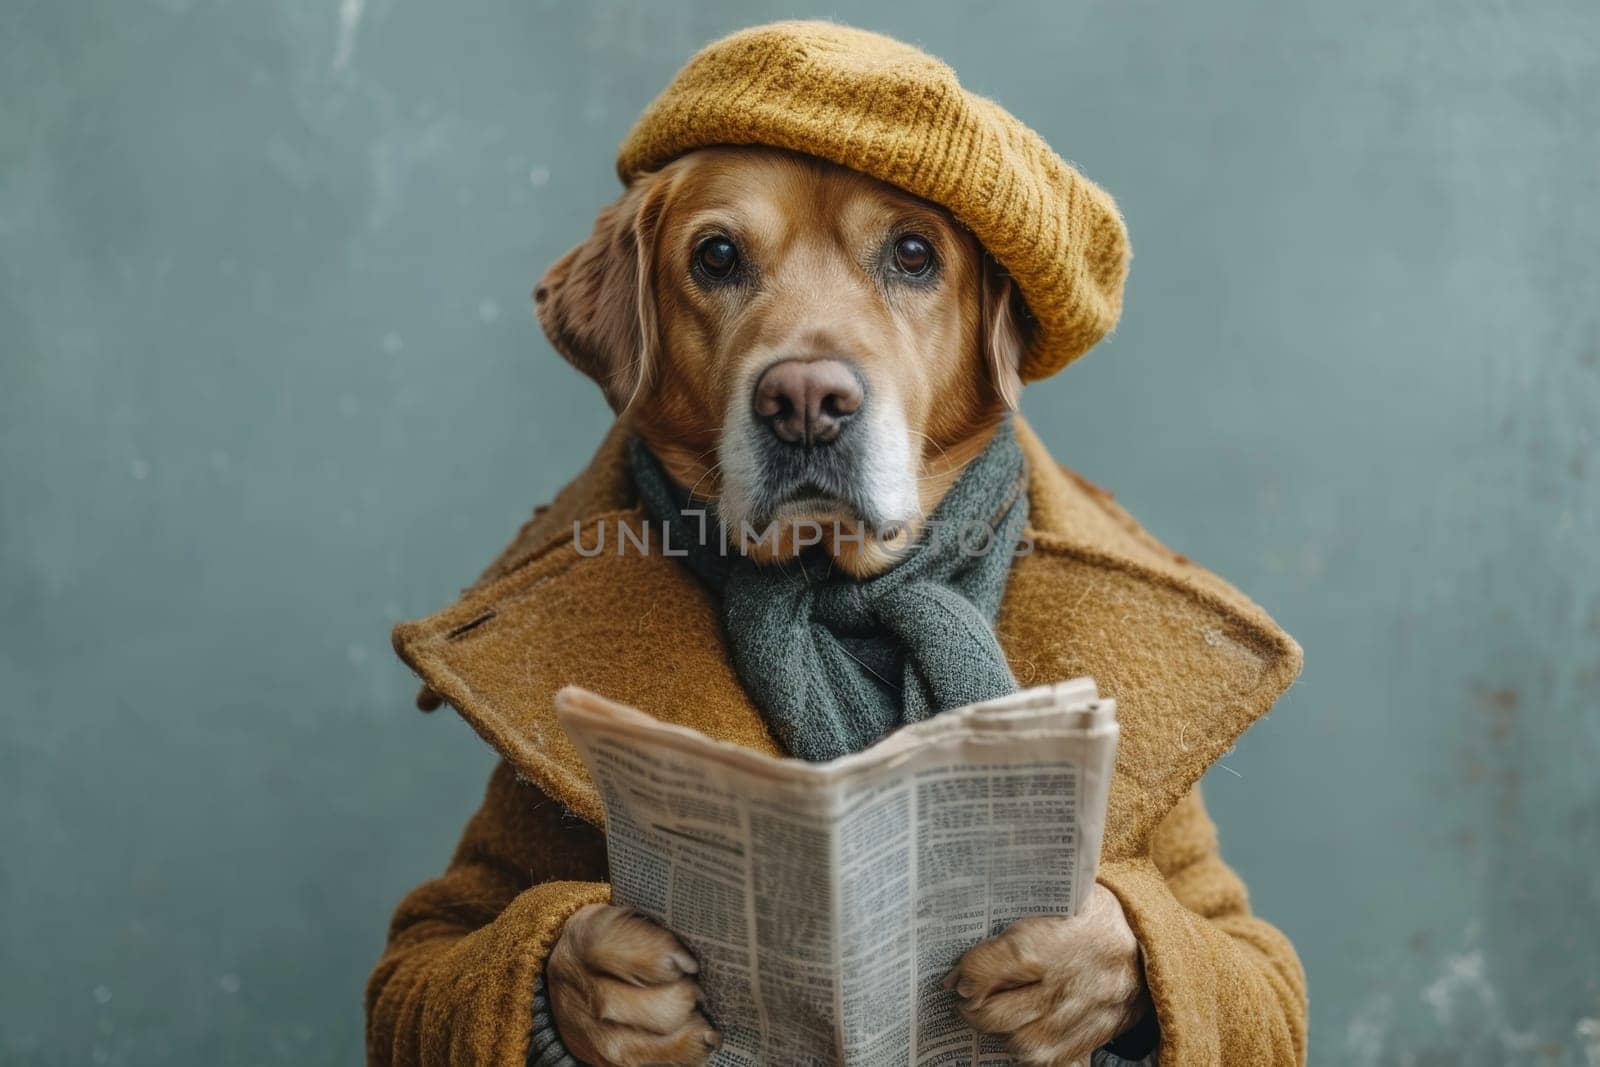 A dog in a hat and clothes reads a letter on a blue background.